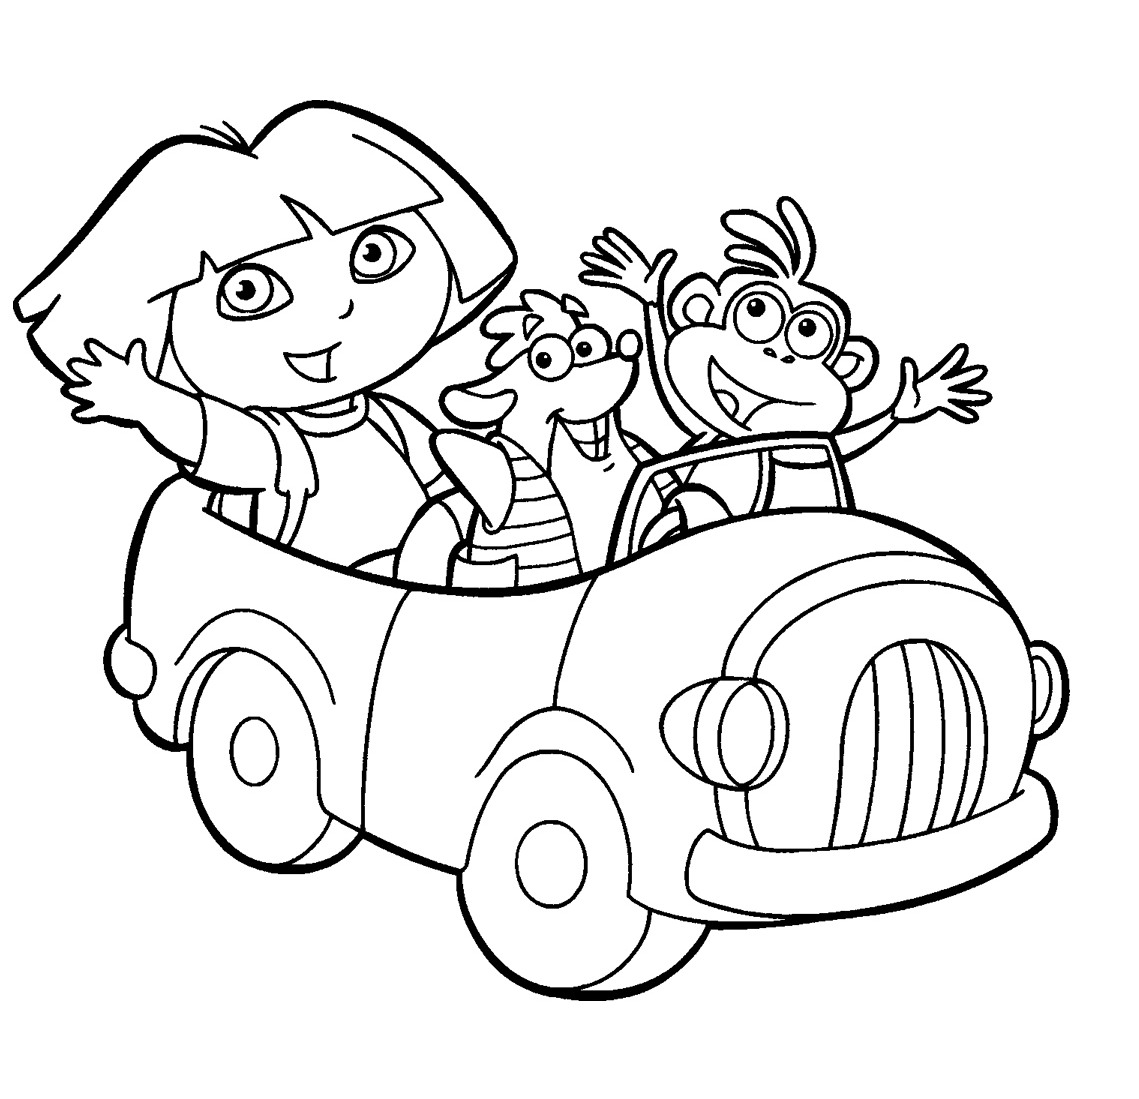 dora the explorer coloring pages | Minister Coloring